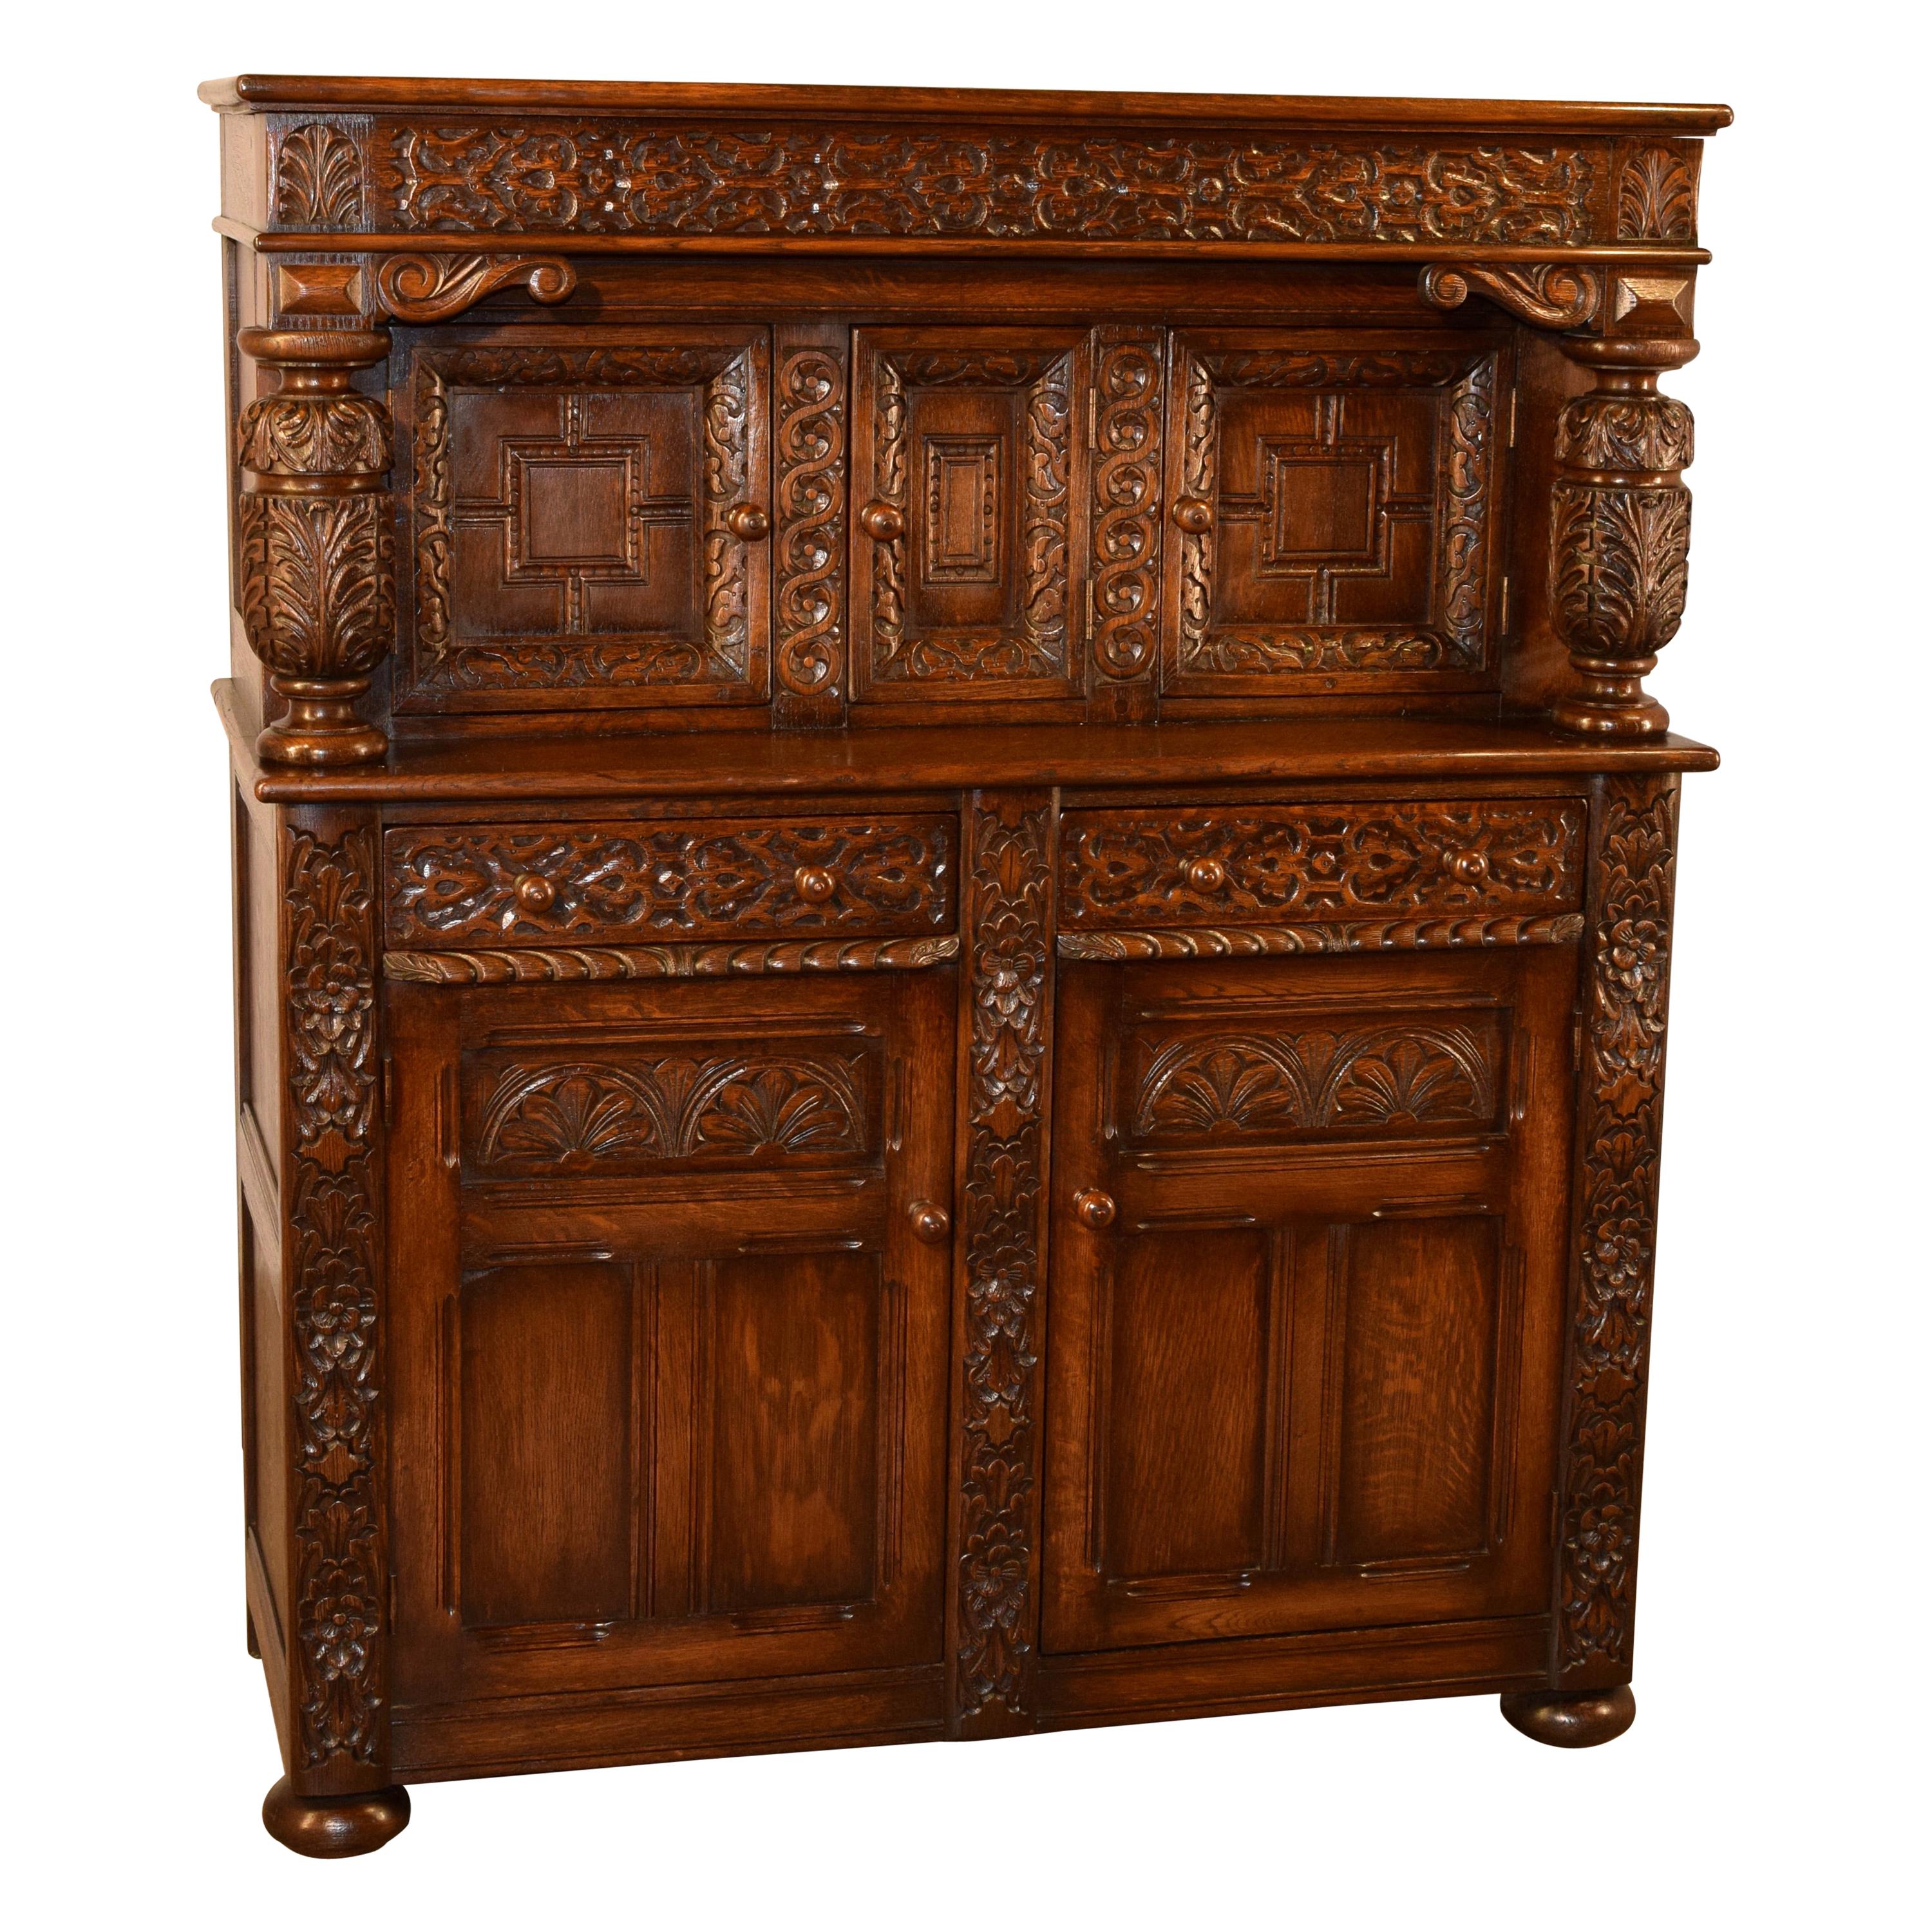 Details about   19th C English Oak Court Cupboard 